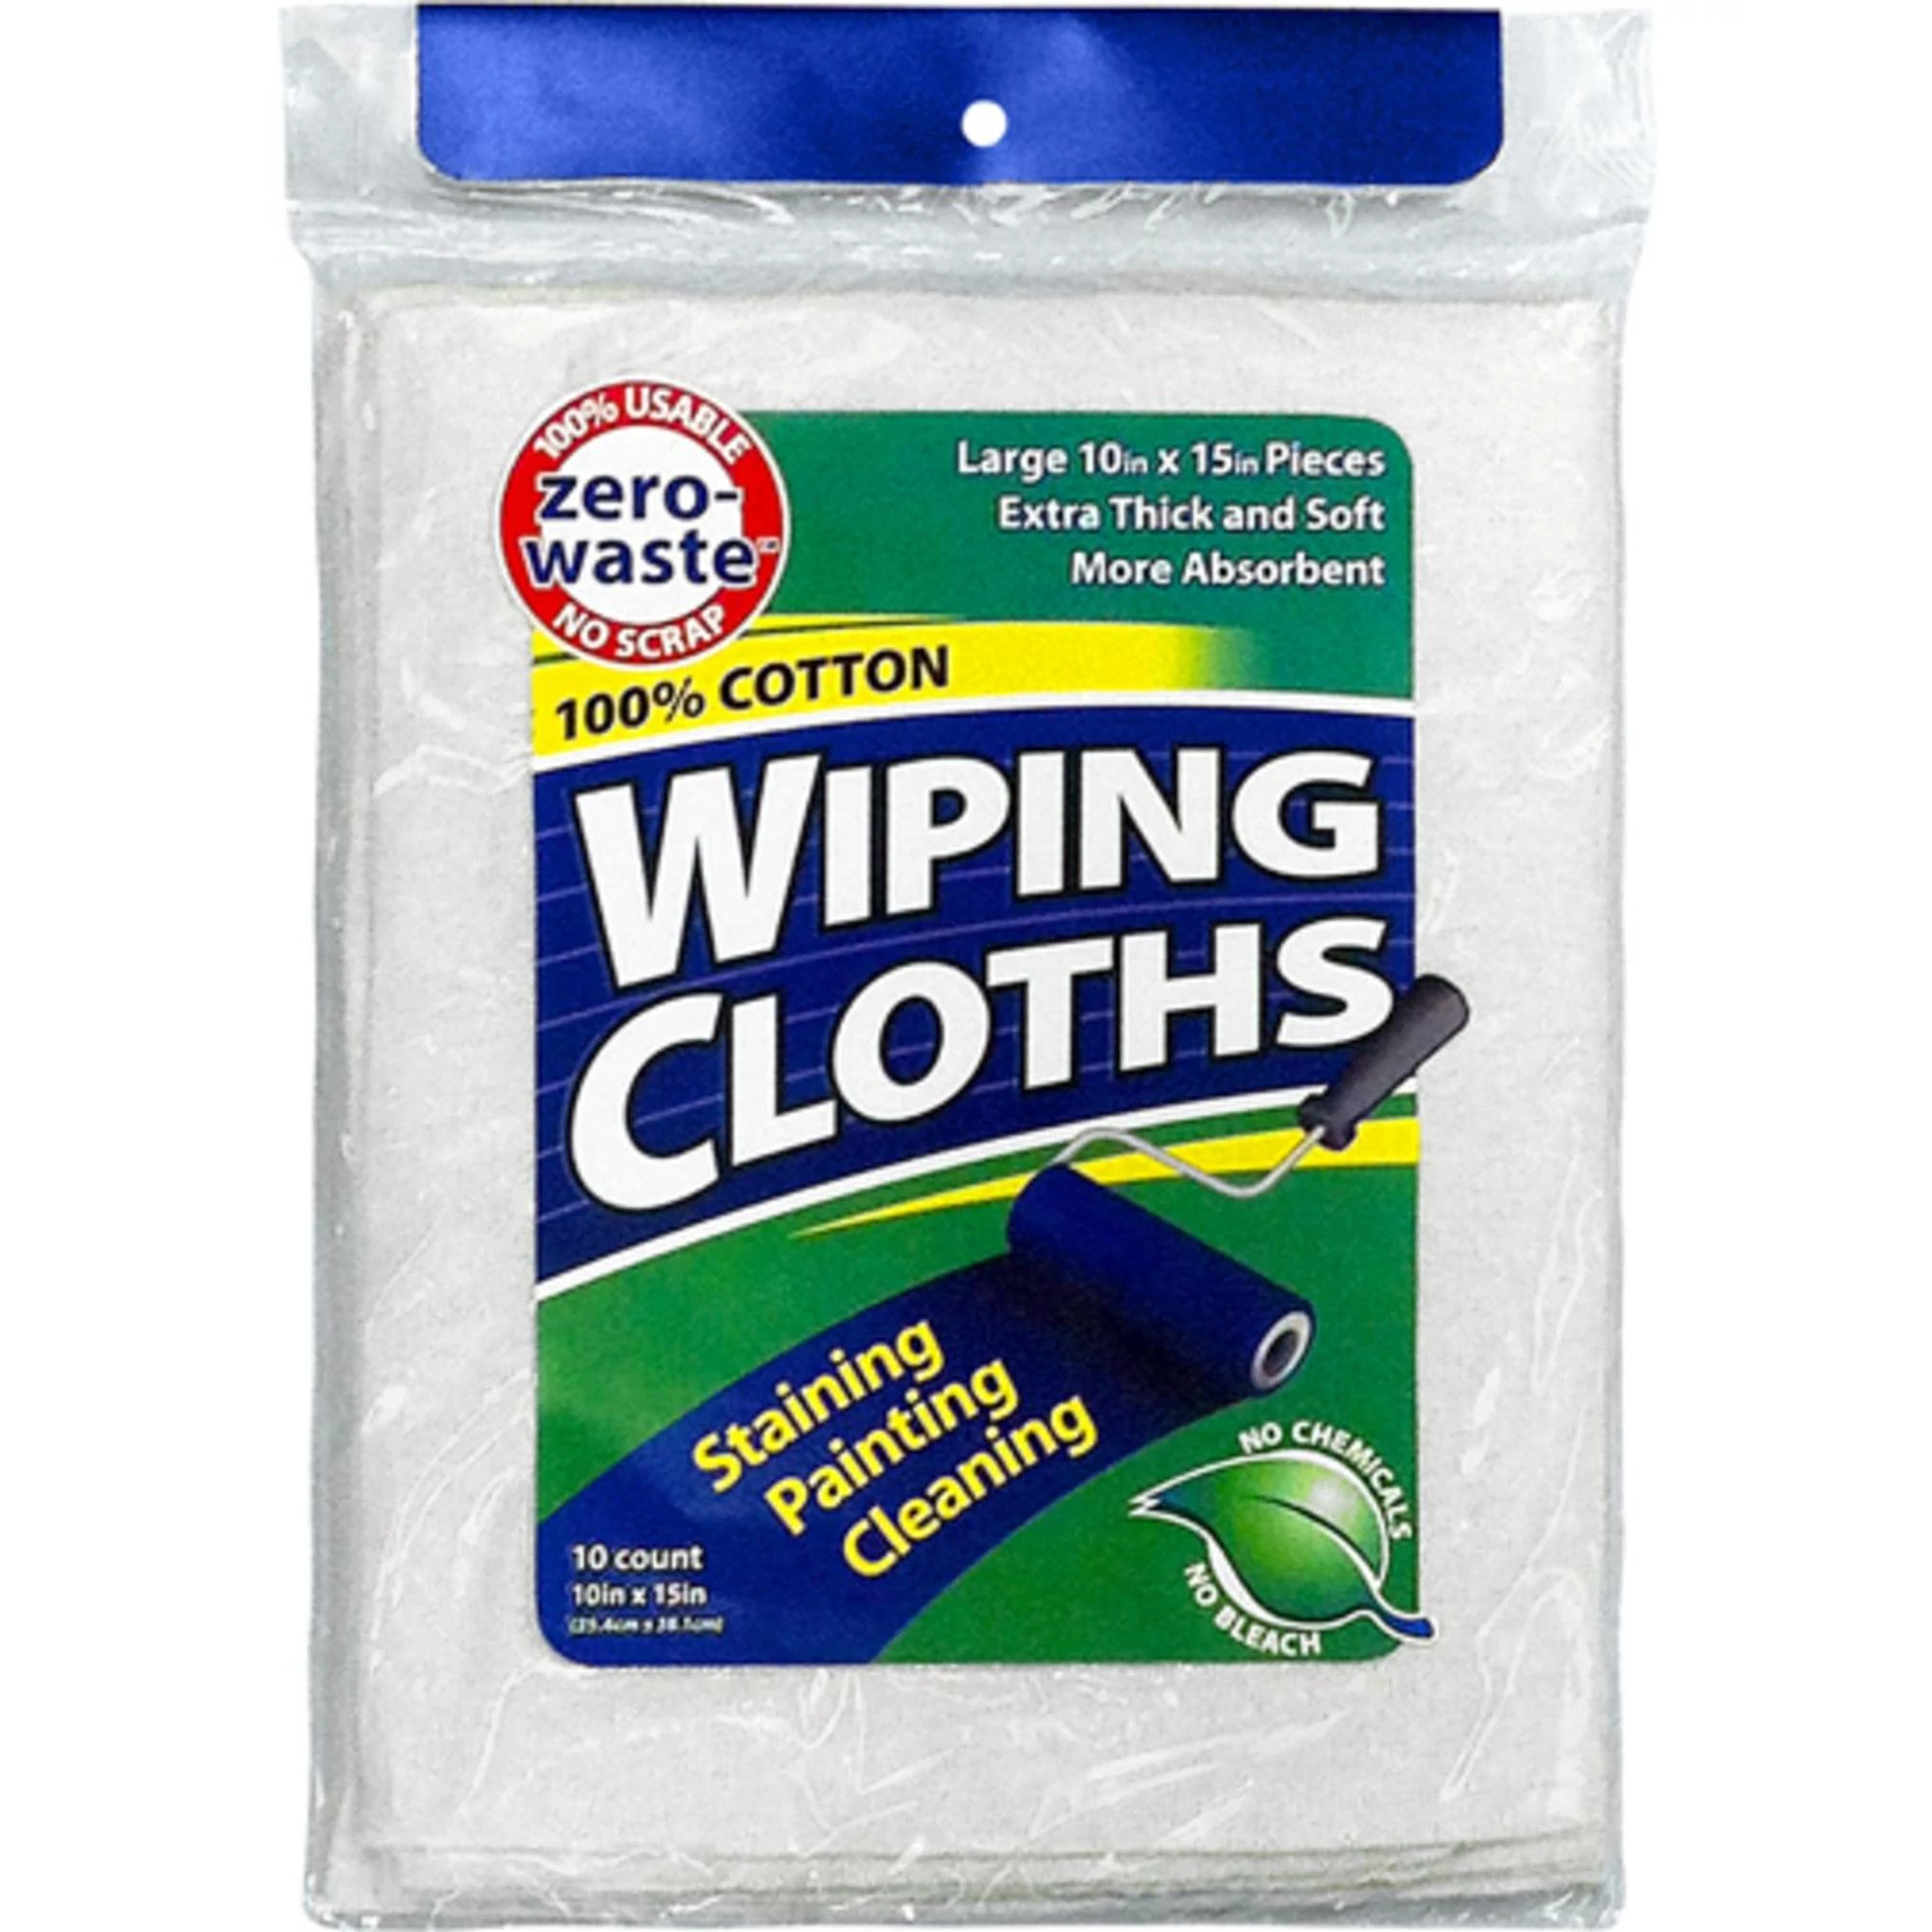 https://s7d2.scene7.com/is/image/sherwinwilliams/100063064-buffalo-industries-wiping-cloth-bag?fit=constrain,1&wid=2000